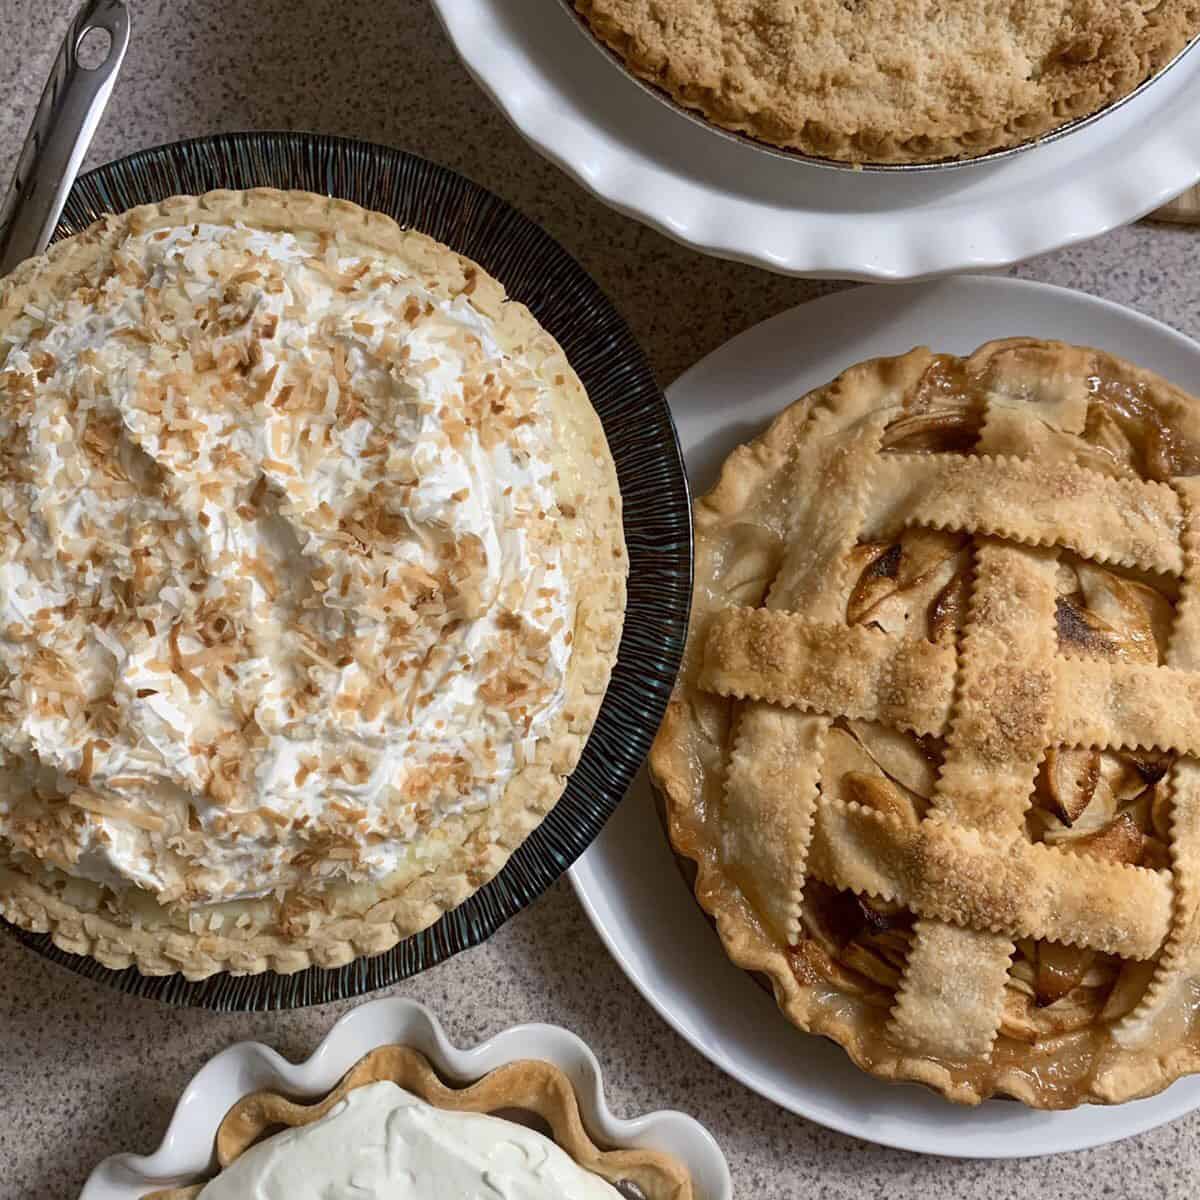 How To Host A Pie Baking Party